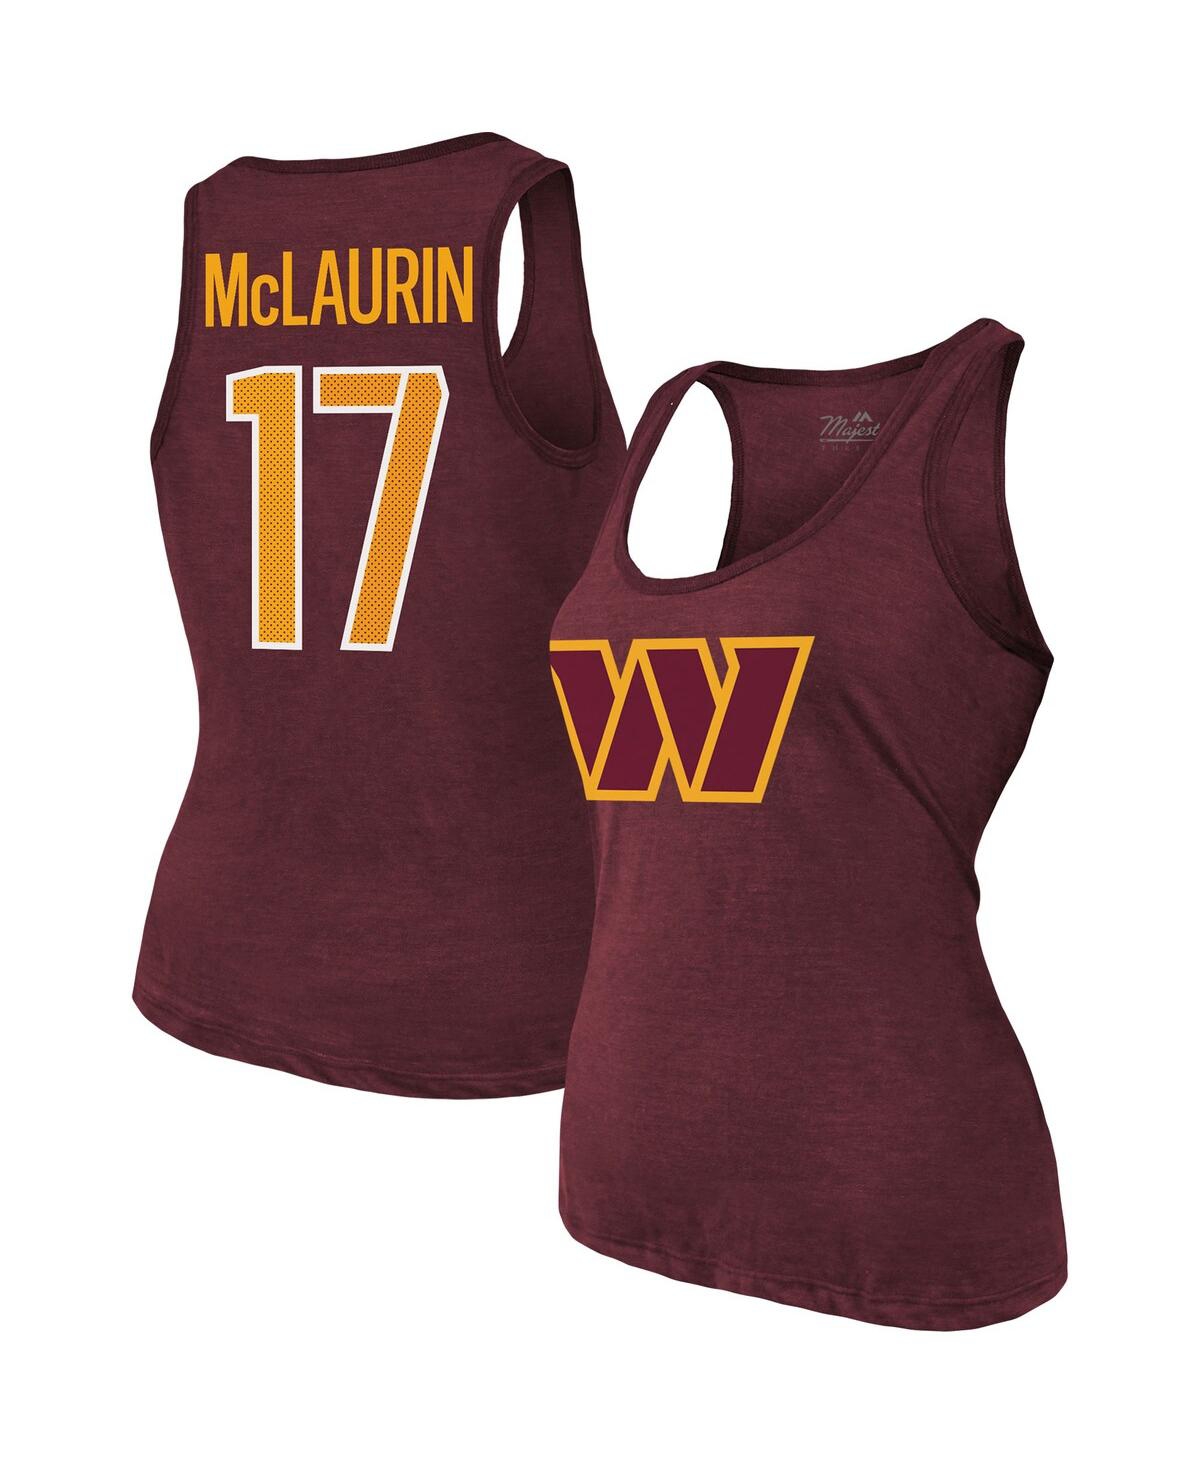 Women's Majestic Threads Terry McLaurin Burgundy Washington Commanders Player Name & Number Tri-Blend Tank Top - Burgundy